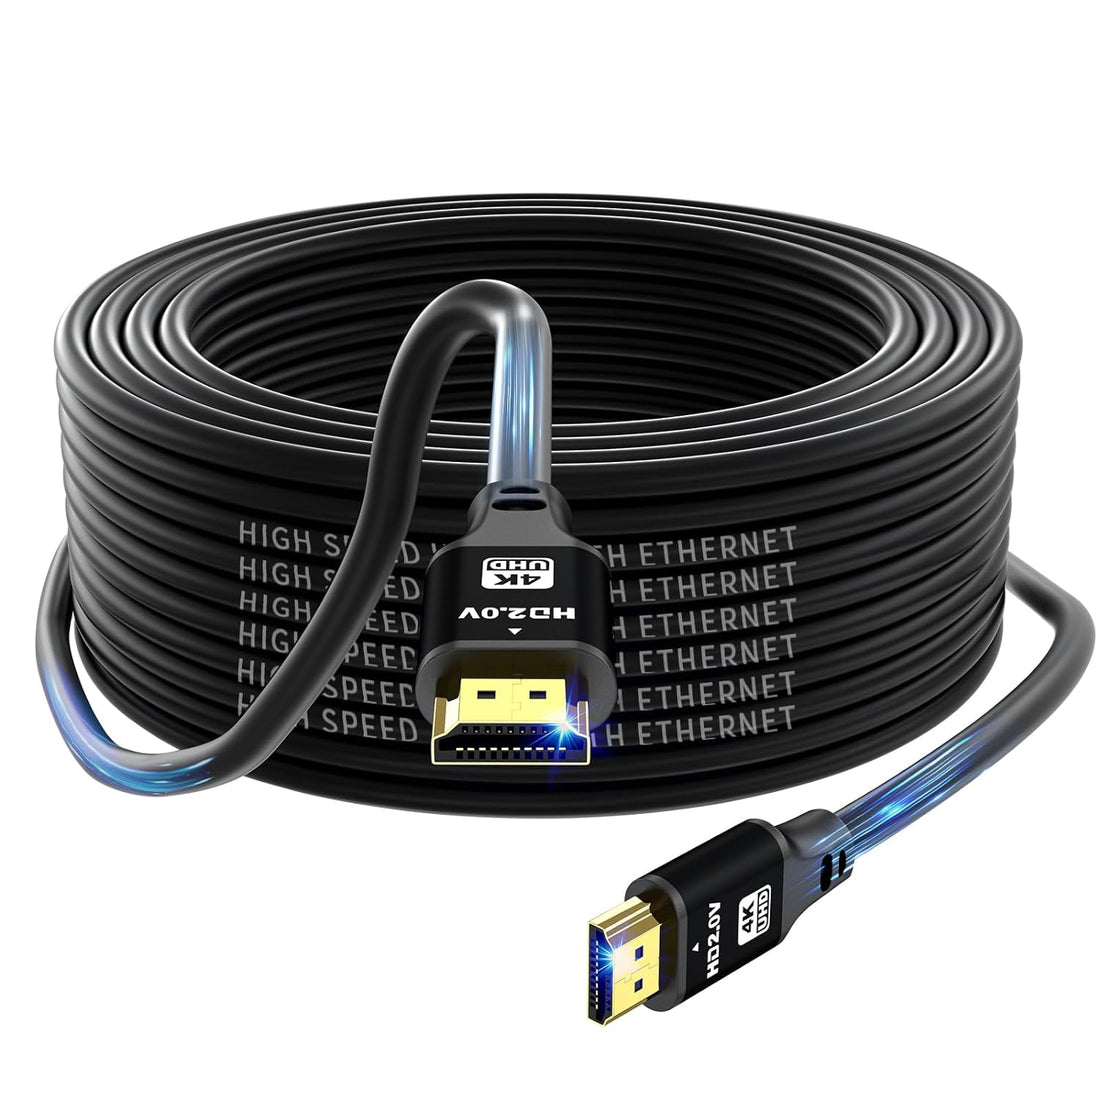 jojobnj HDMI Cable 25ft, 48Gbps 8K@60Hz 4K@120Hz, HDCP 2.2 & 2.3, DTS:X, HDR 10 Compatible with Roku TV/eARC/3D/PS5/HDTV/Laptop/Blu-ray High Speed HDMI Cable(Black)